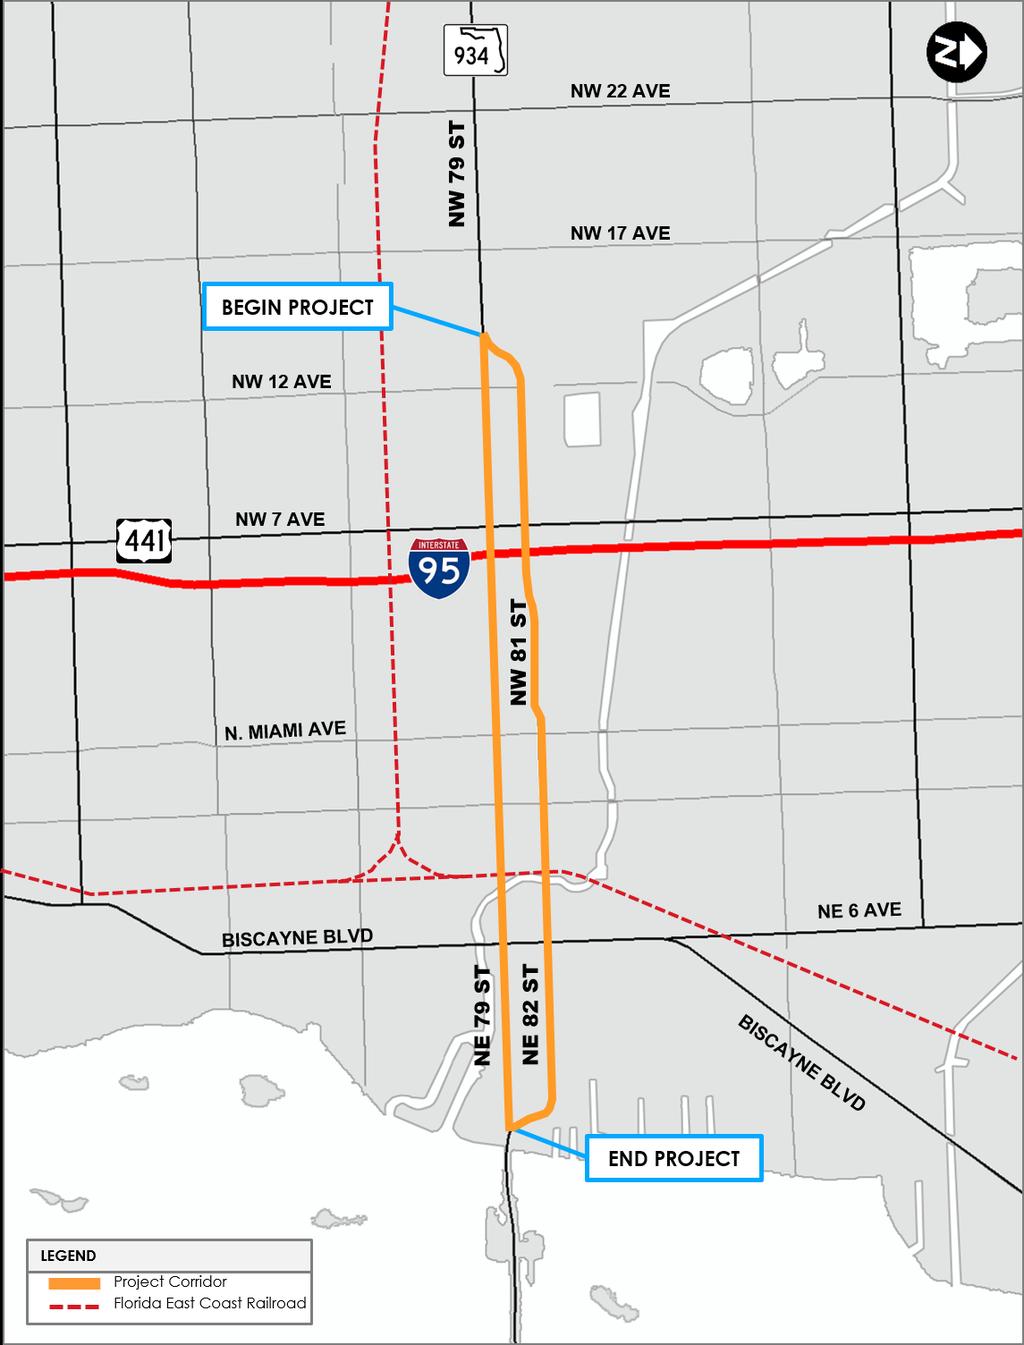 PROJECT LOCATION PD&E Study Limits SR 934 (both 79 th and 81 st /82 nd ) from NW 13 th Court to N.